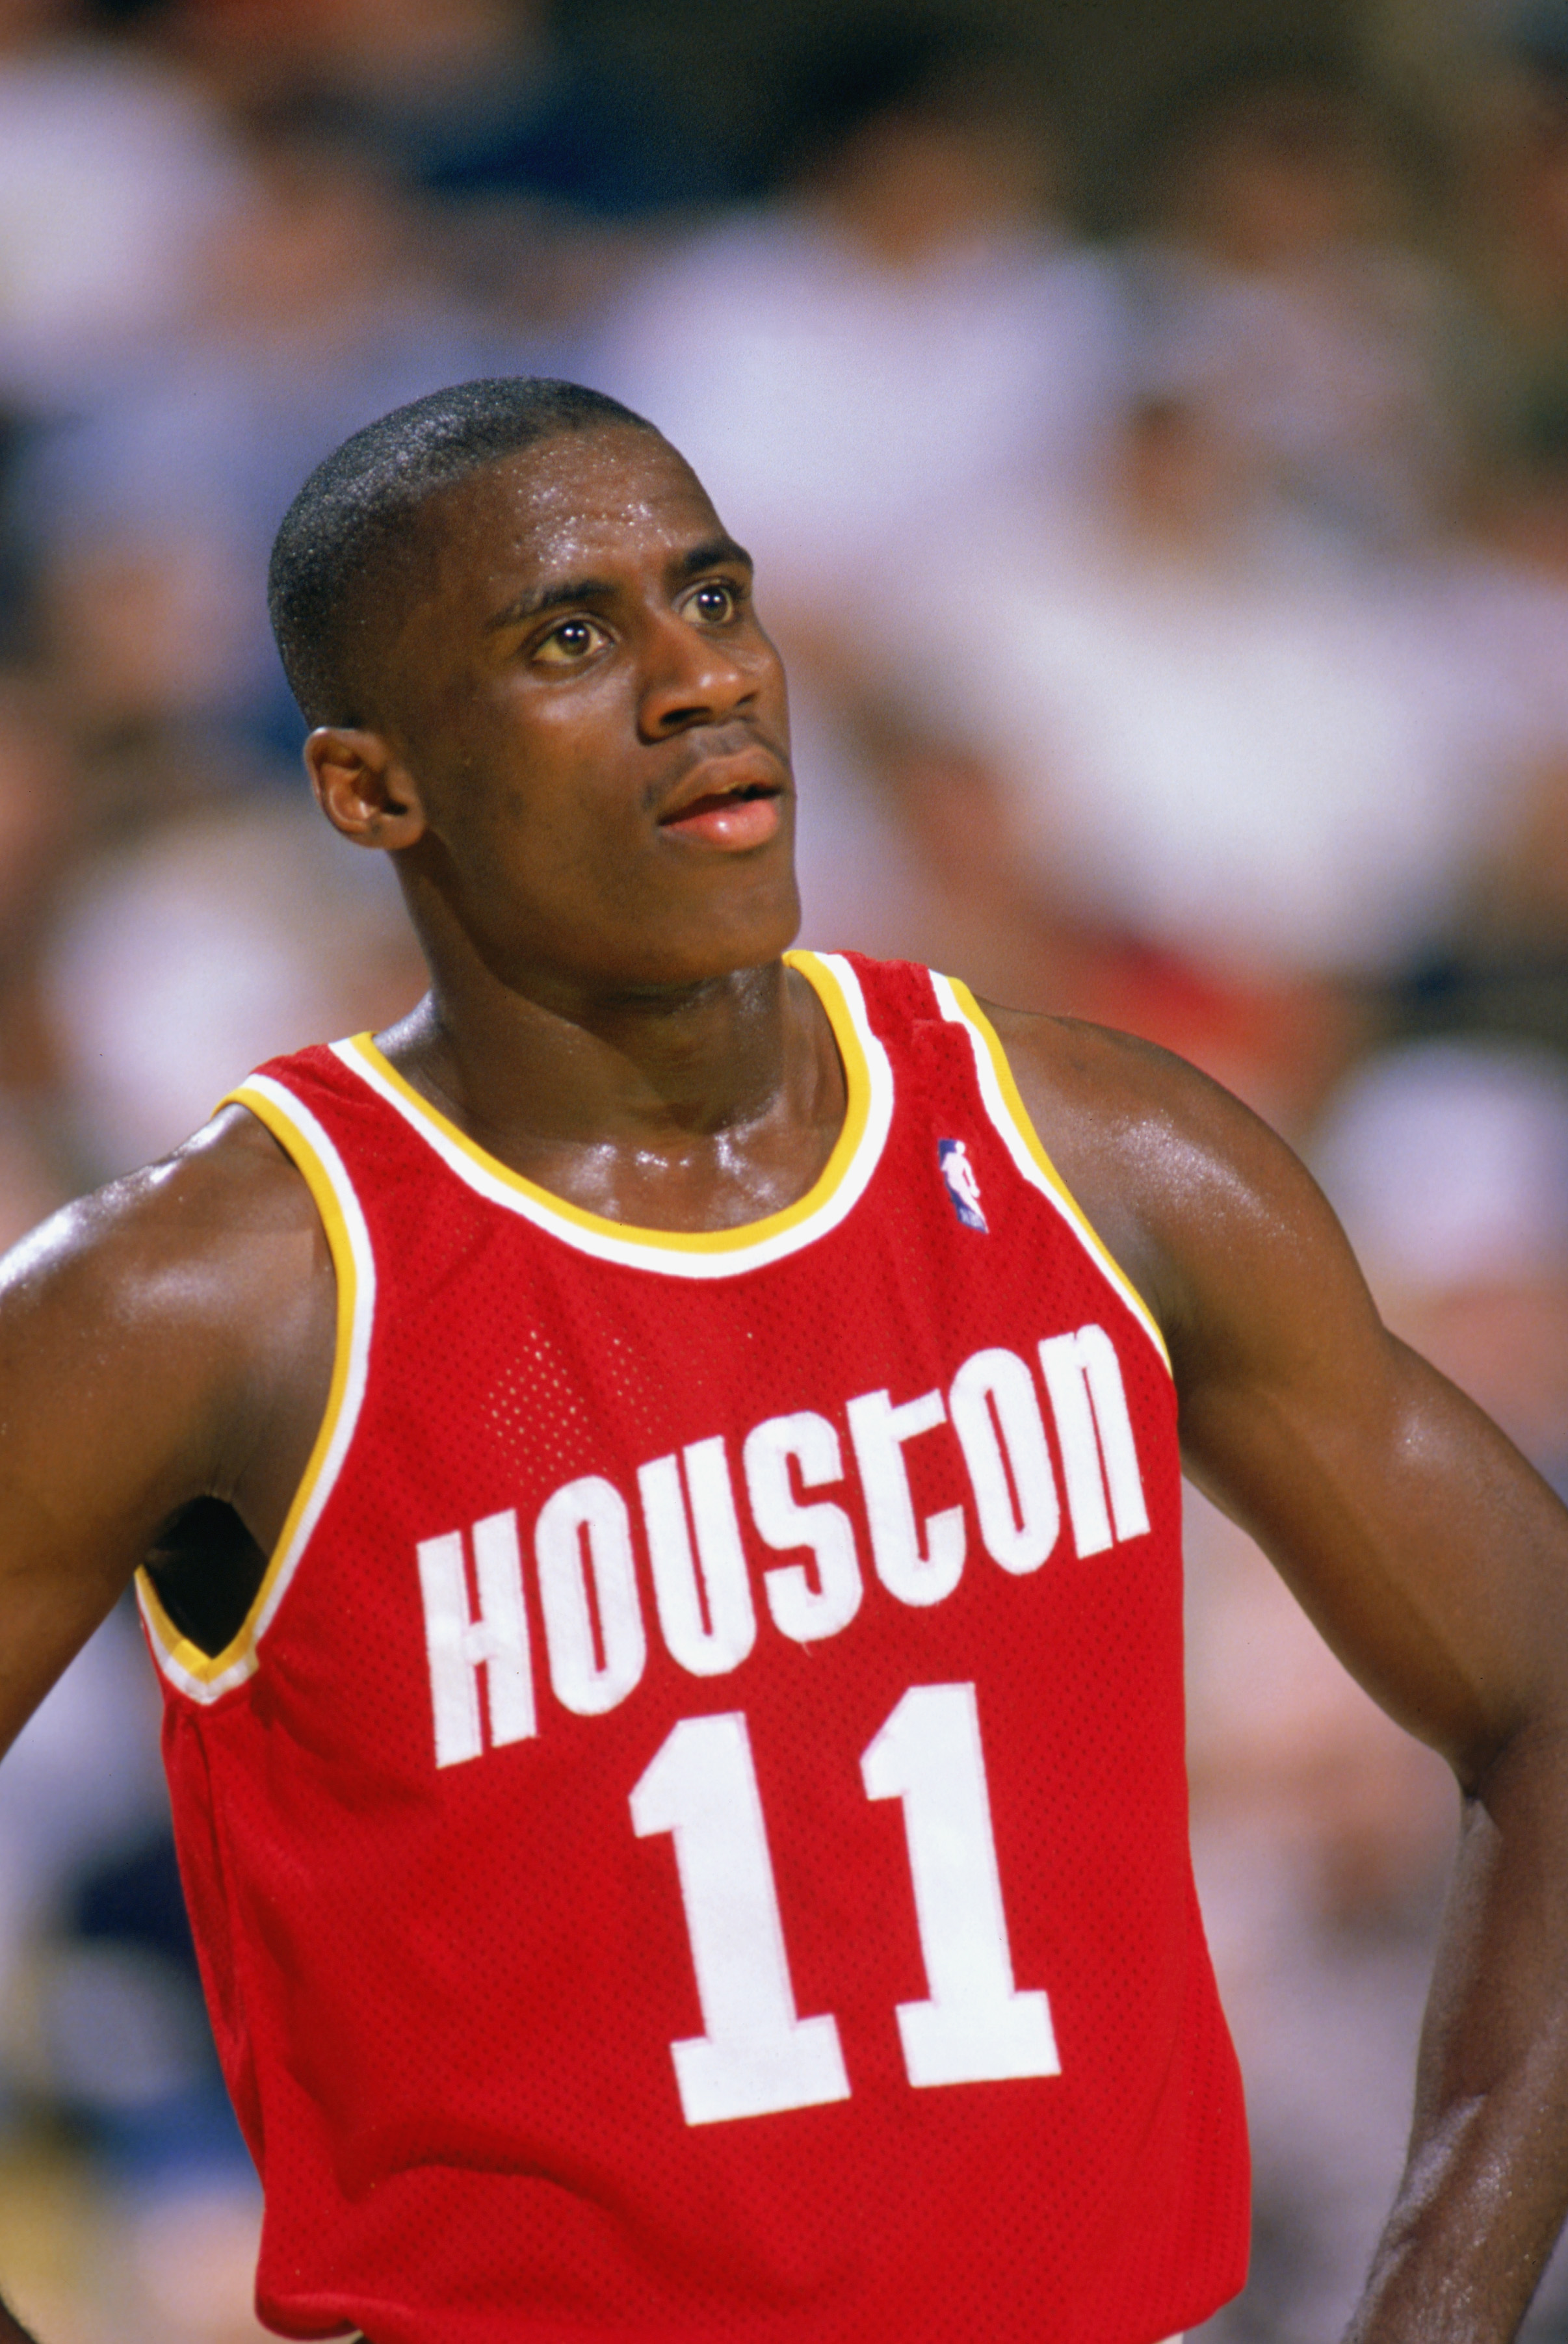 1989:  Vernon Maxwell #11 of the Houston Rockets looks on during a game in the1989-90 season.  NOTE TO USER: User expressly acknowledges and agrees that, by downloading and/or using this Photograph, User is consenting to the terms and conditions of the Ge